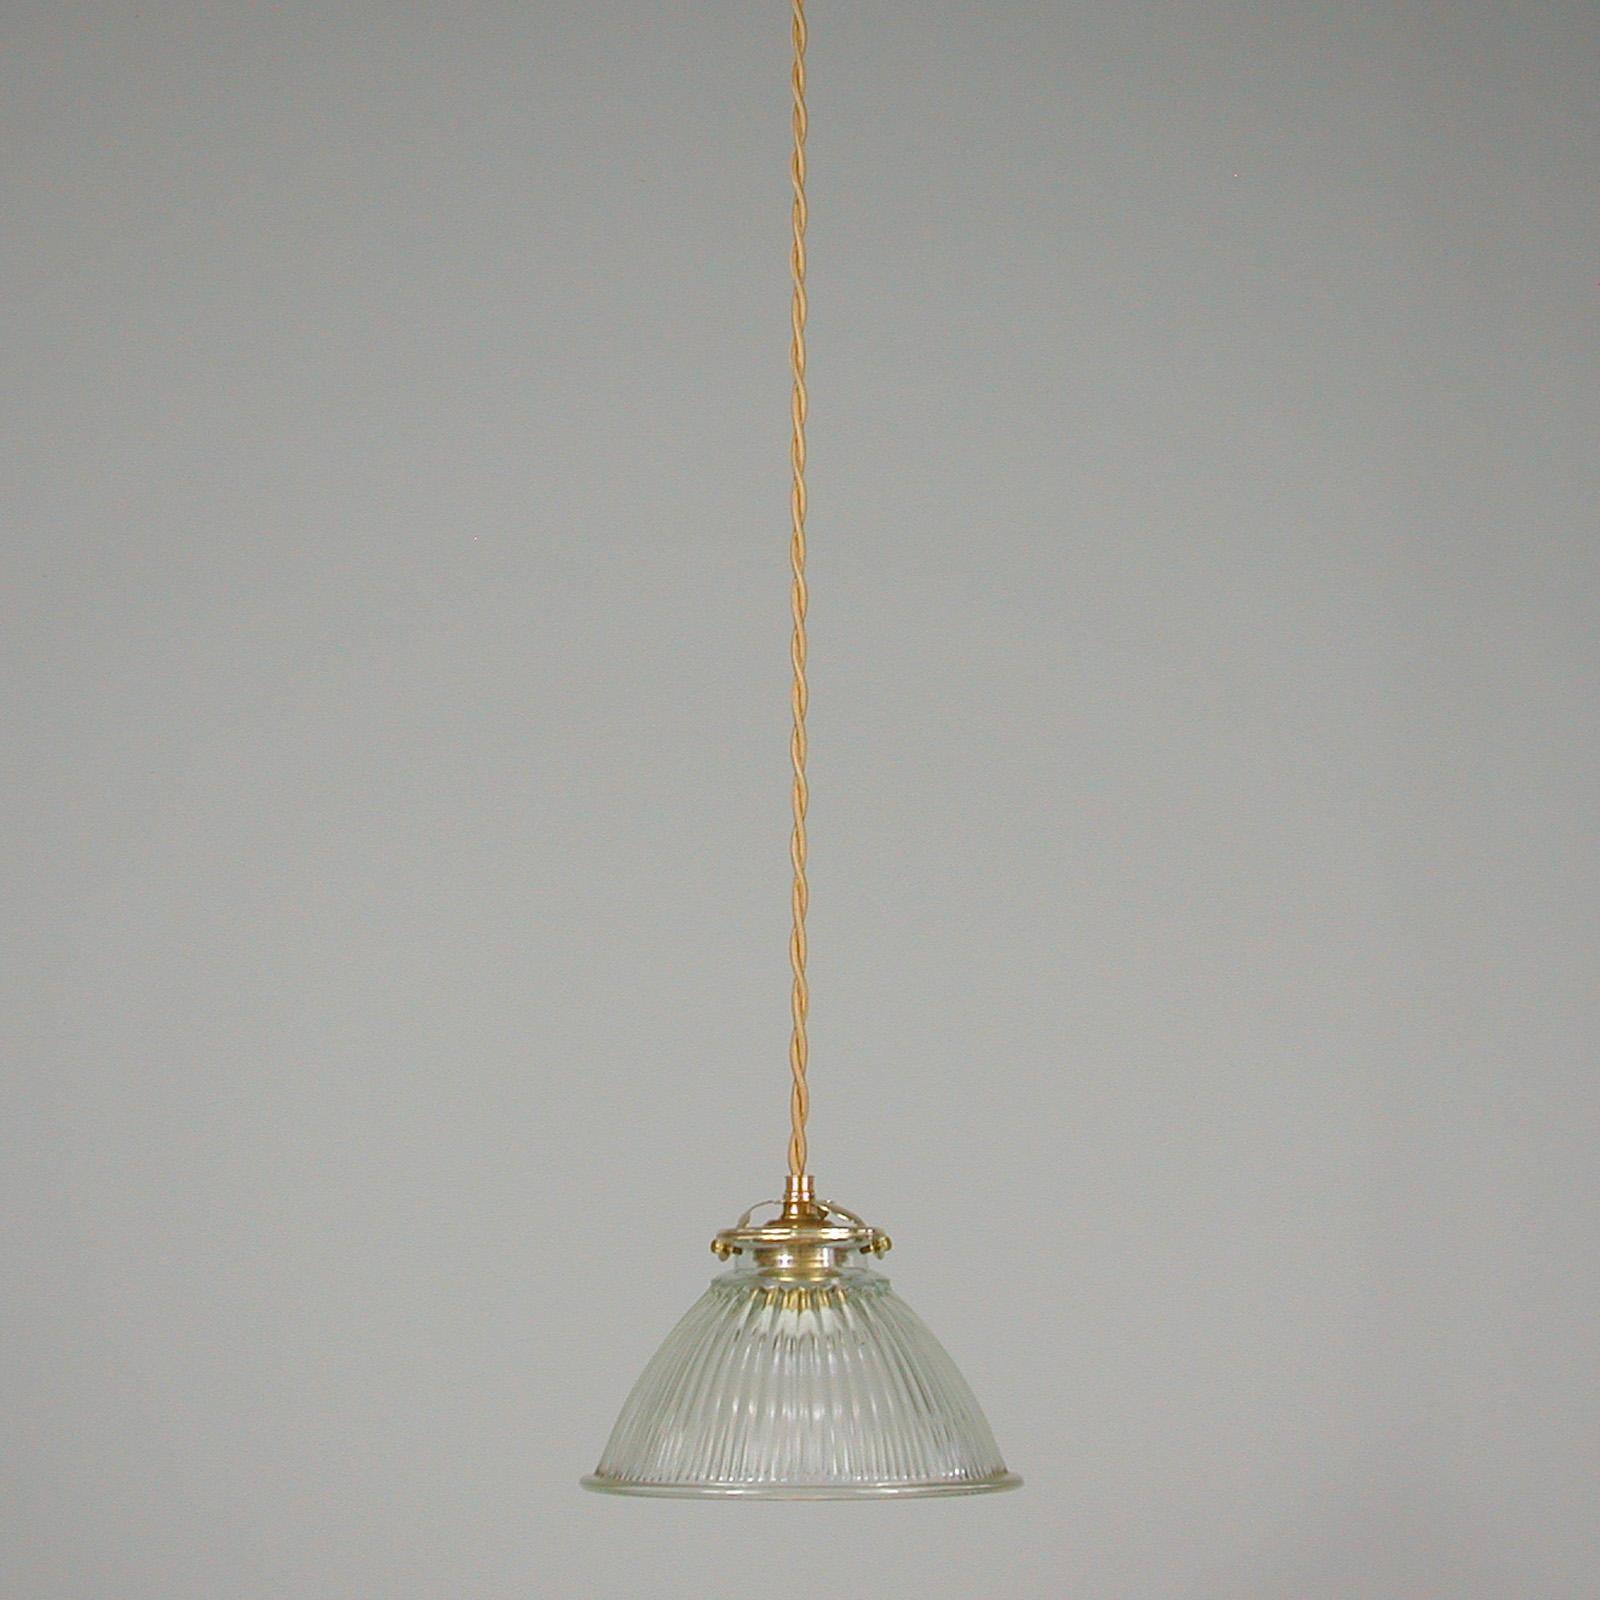 Mid-20th Century French Late Art Deco Holophane Industrial Glass Pendant Light, 1930s to 1940s